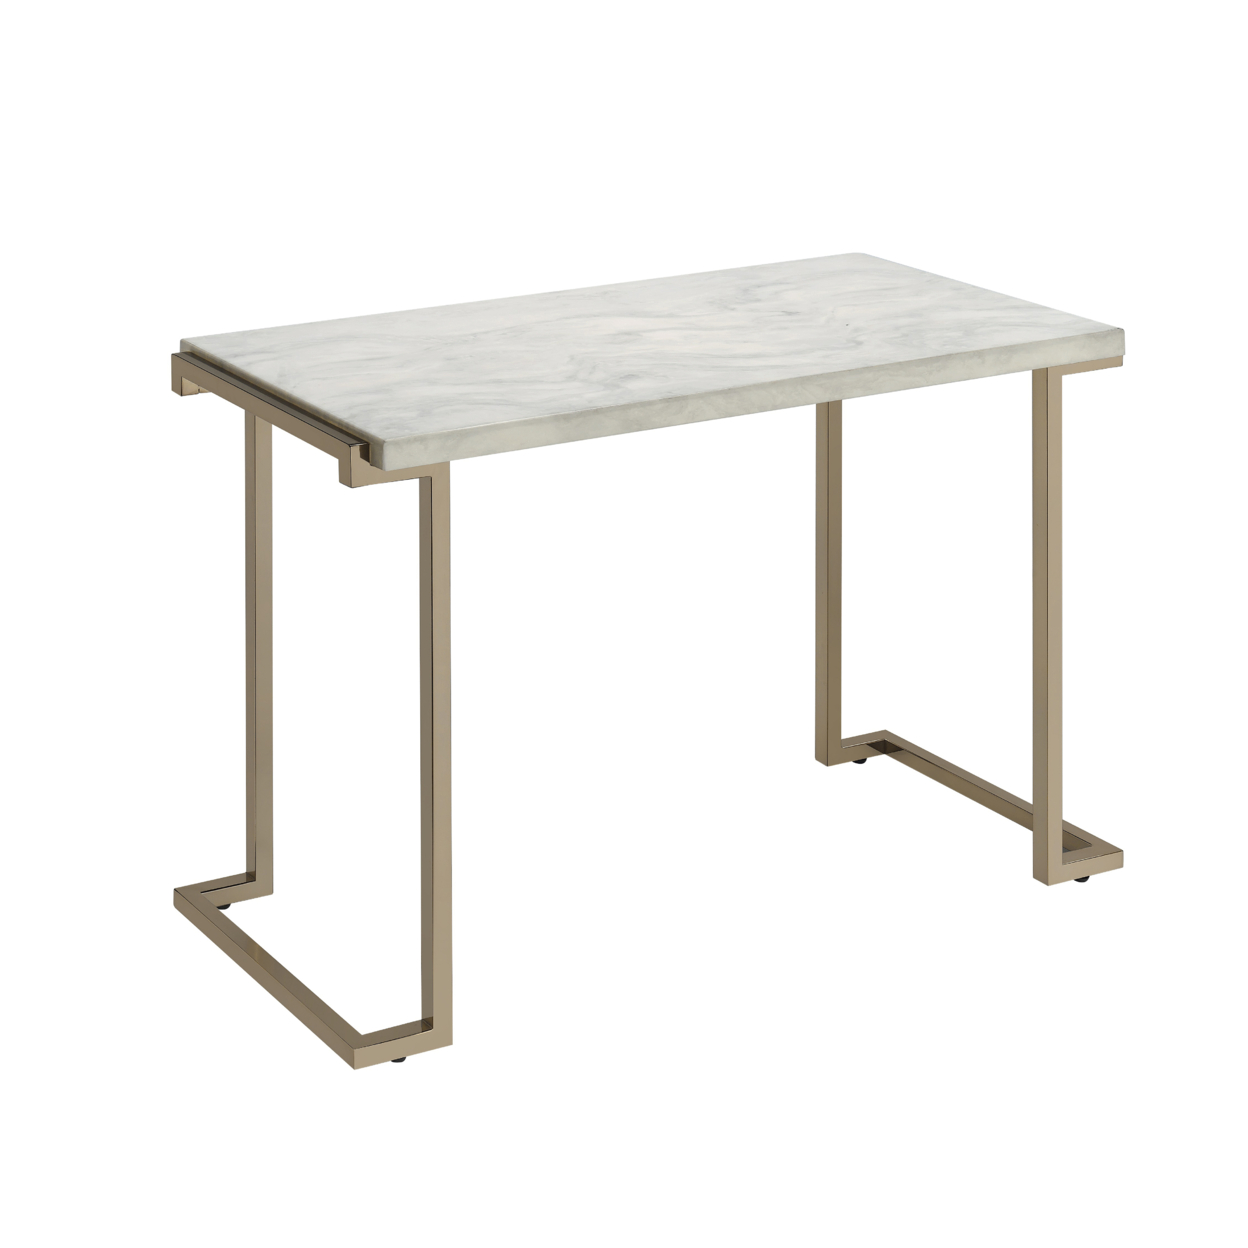 Contemporary Metal Frame Sofa Table With Faux Marble Top ,White And Gold- Saltoro Sherpi